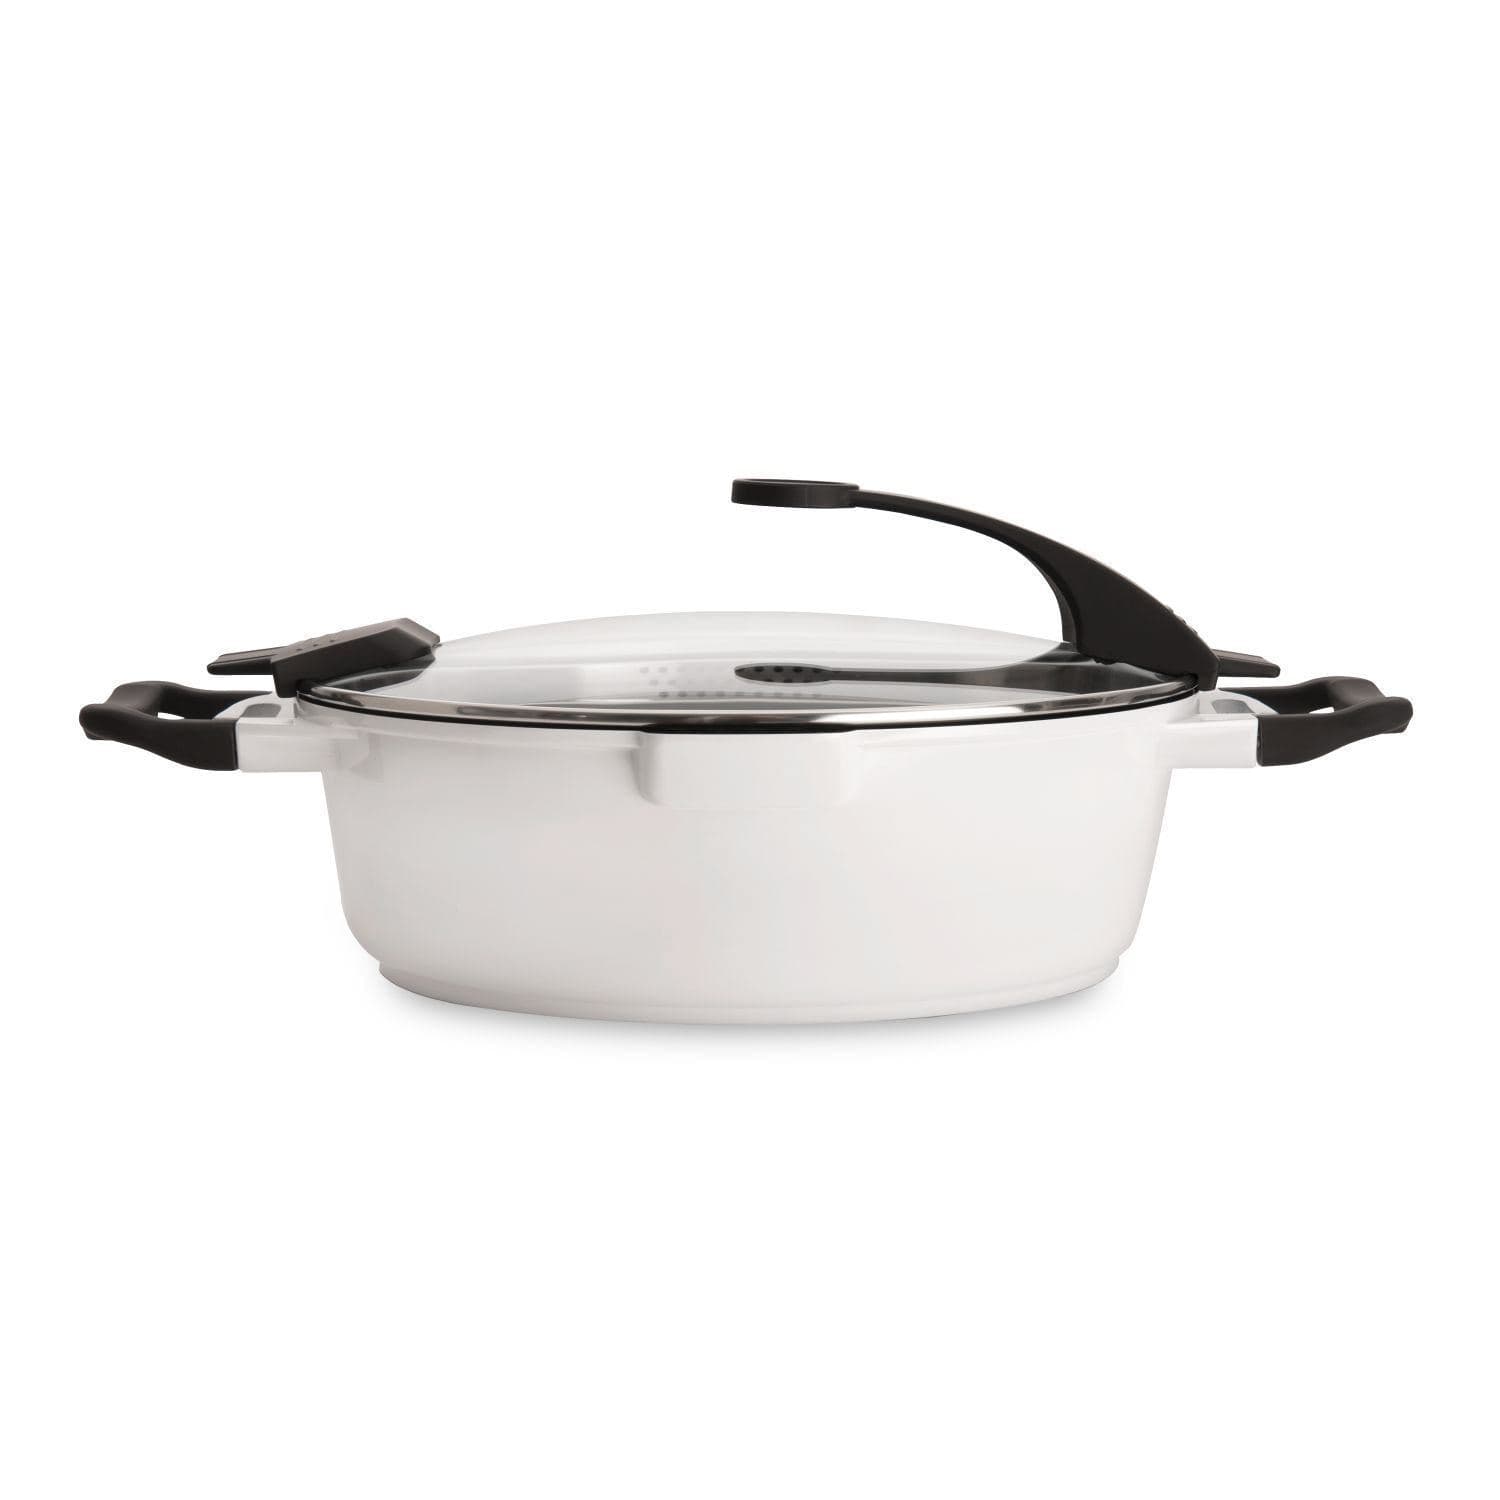 BergHOFF Virgo 2-Handle Deep Skillet with Cover - White, 28 cm - 2304919 - Jashanmal Home